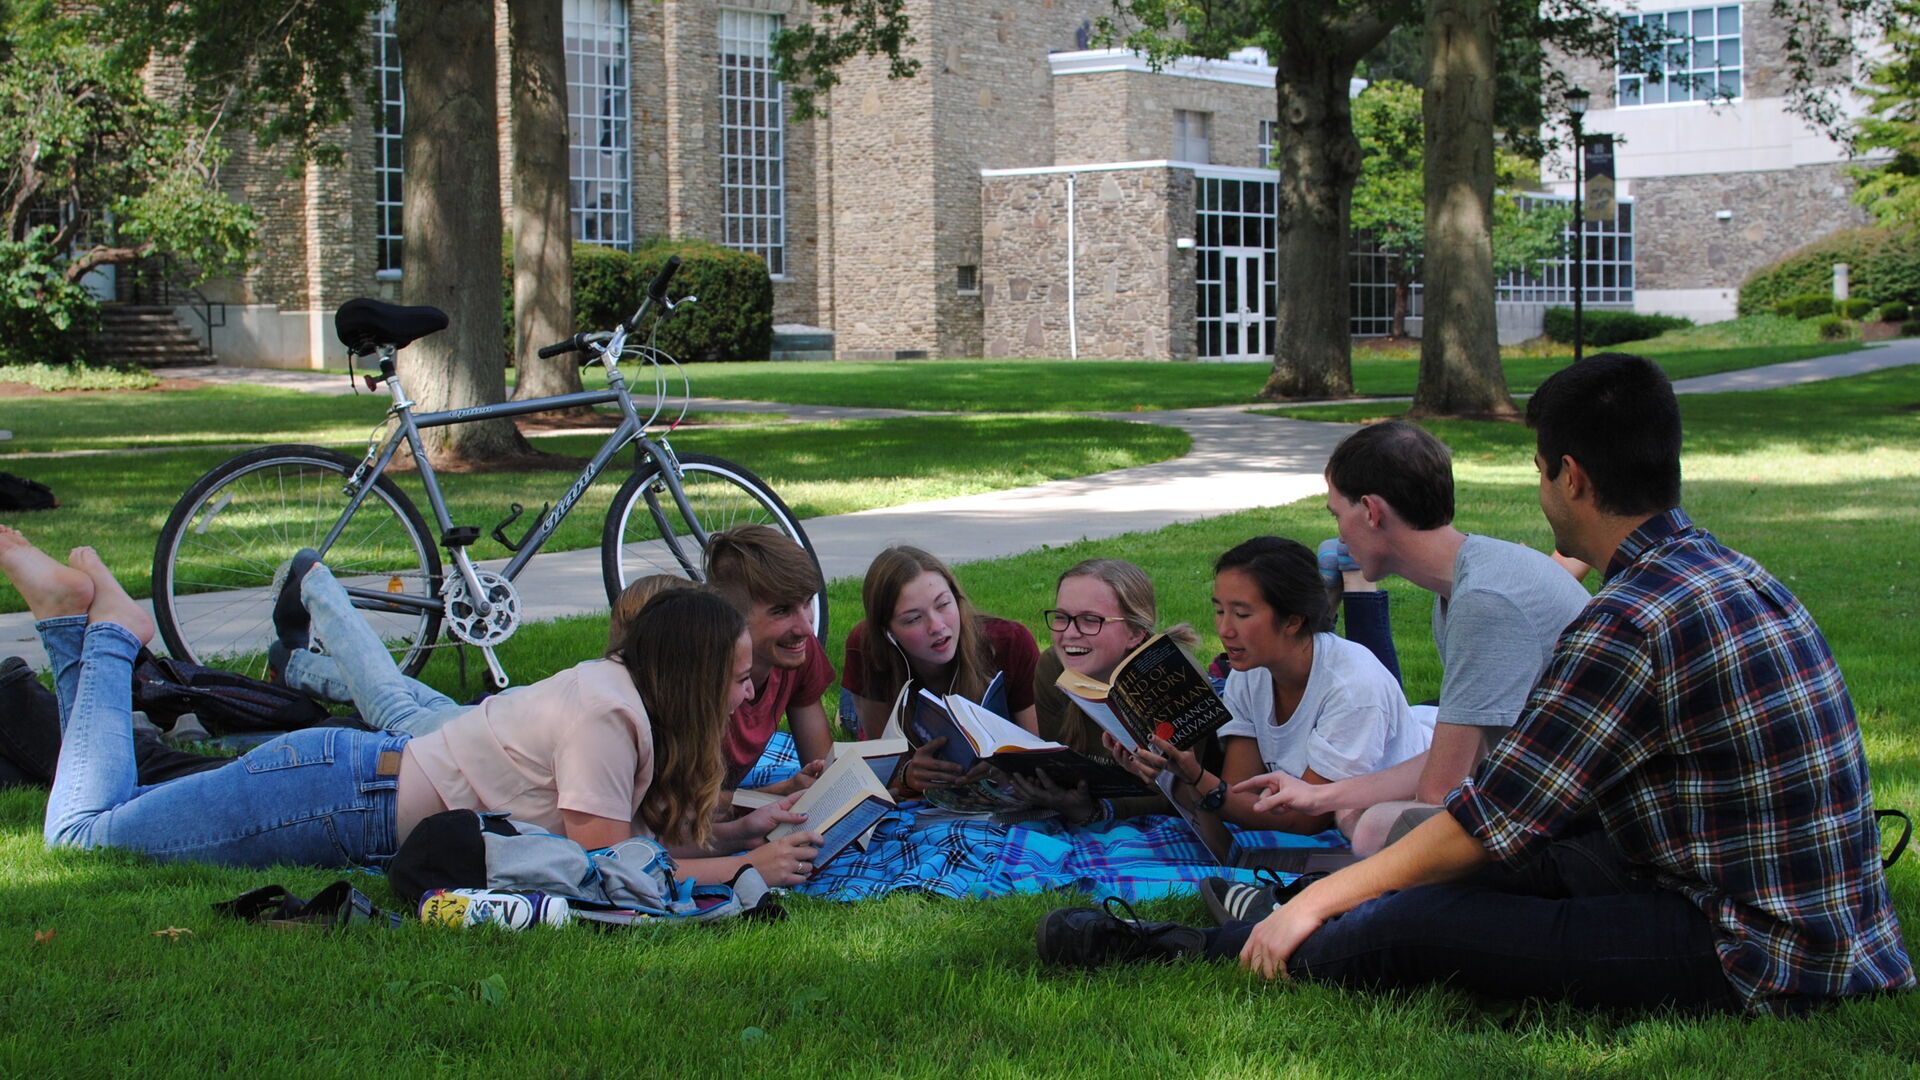 Student gathered on a blanket sharing a book together on Houghton's campus.